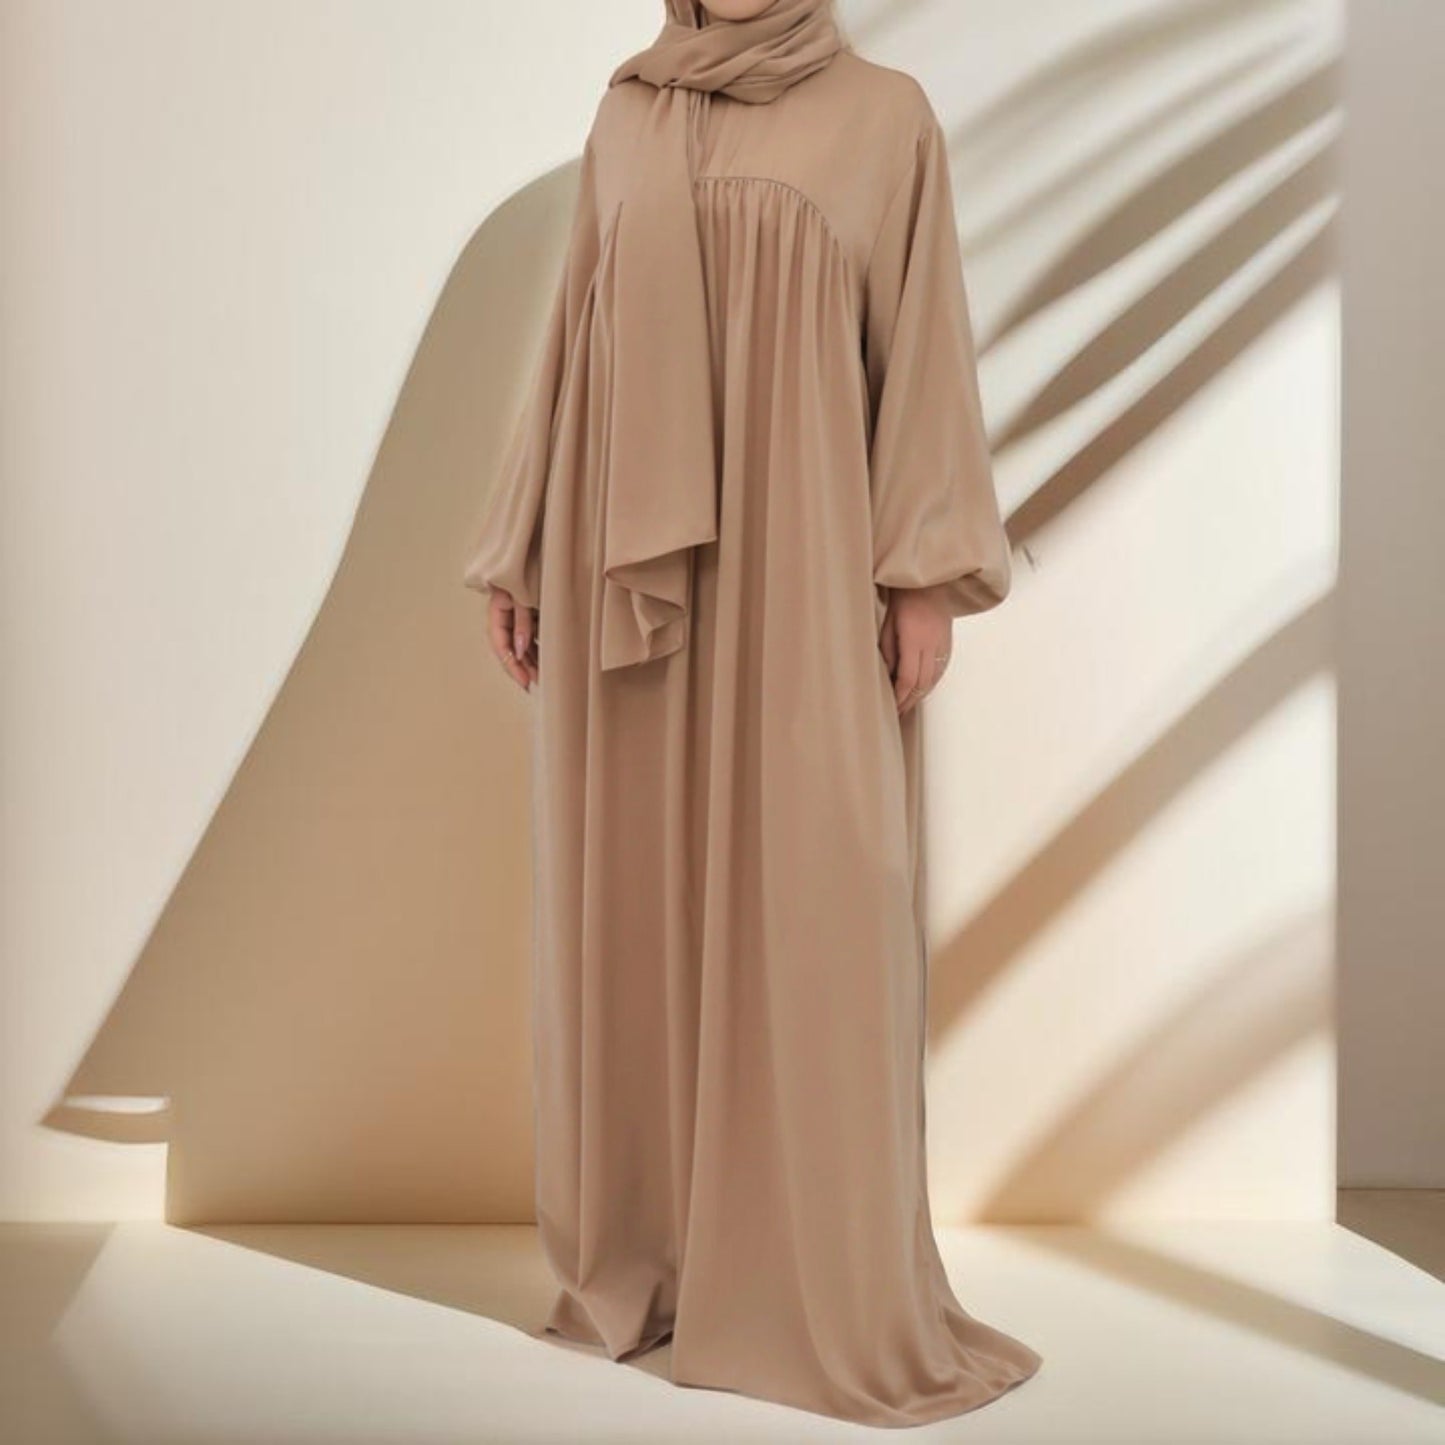 Shimmery Abaya Dress with Loose Fit - Try Modest Limited 